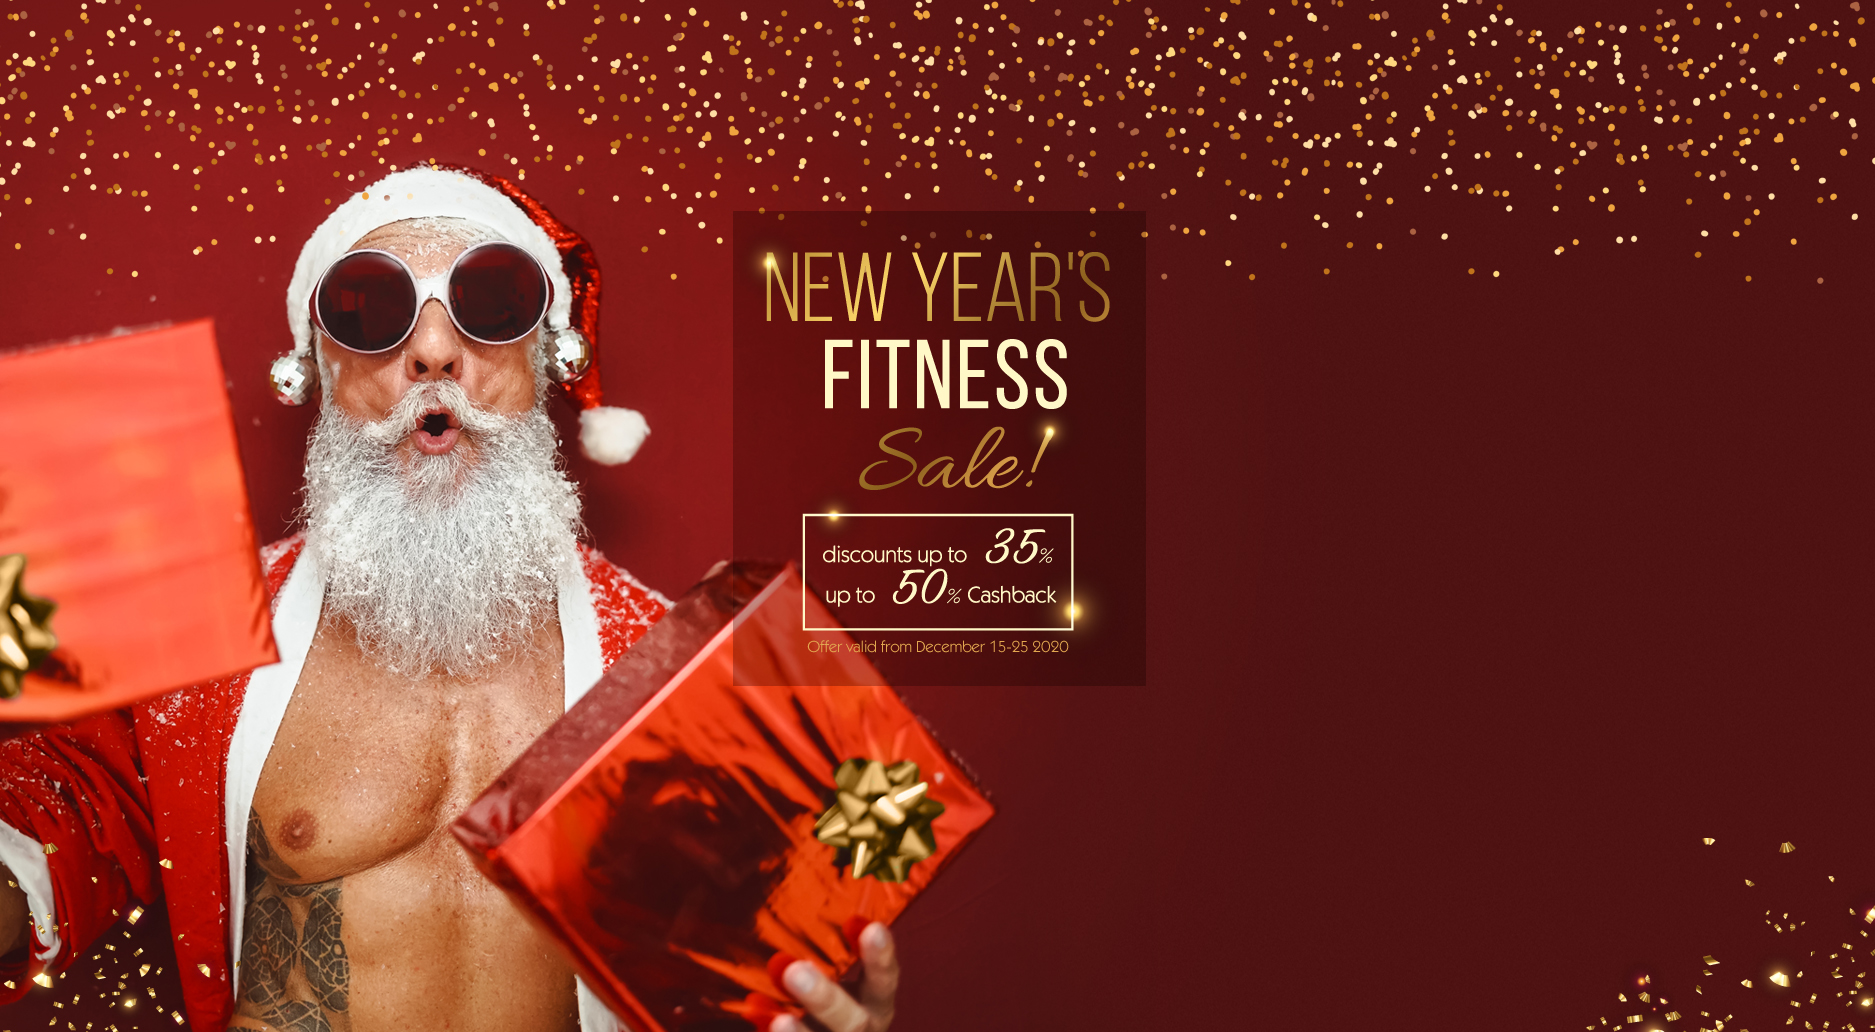 New Year's fitness SALE!